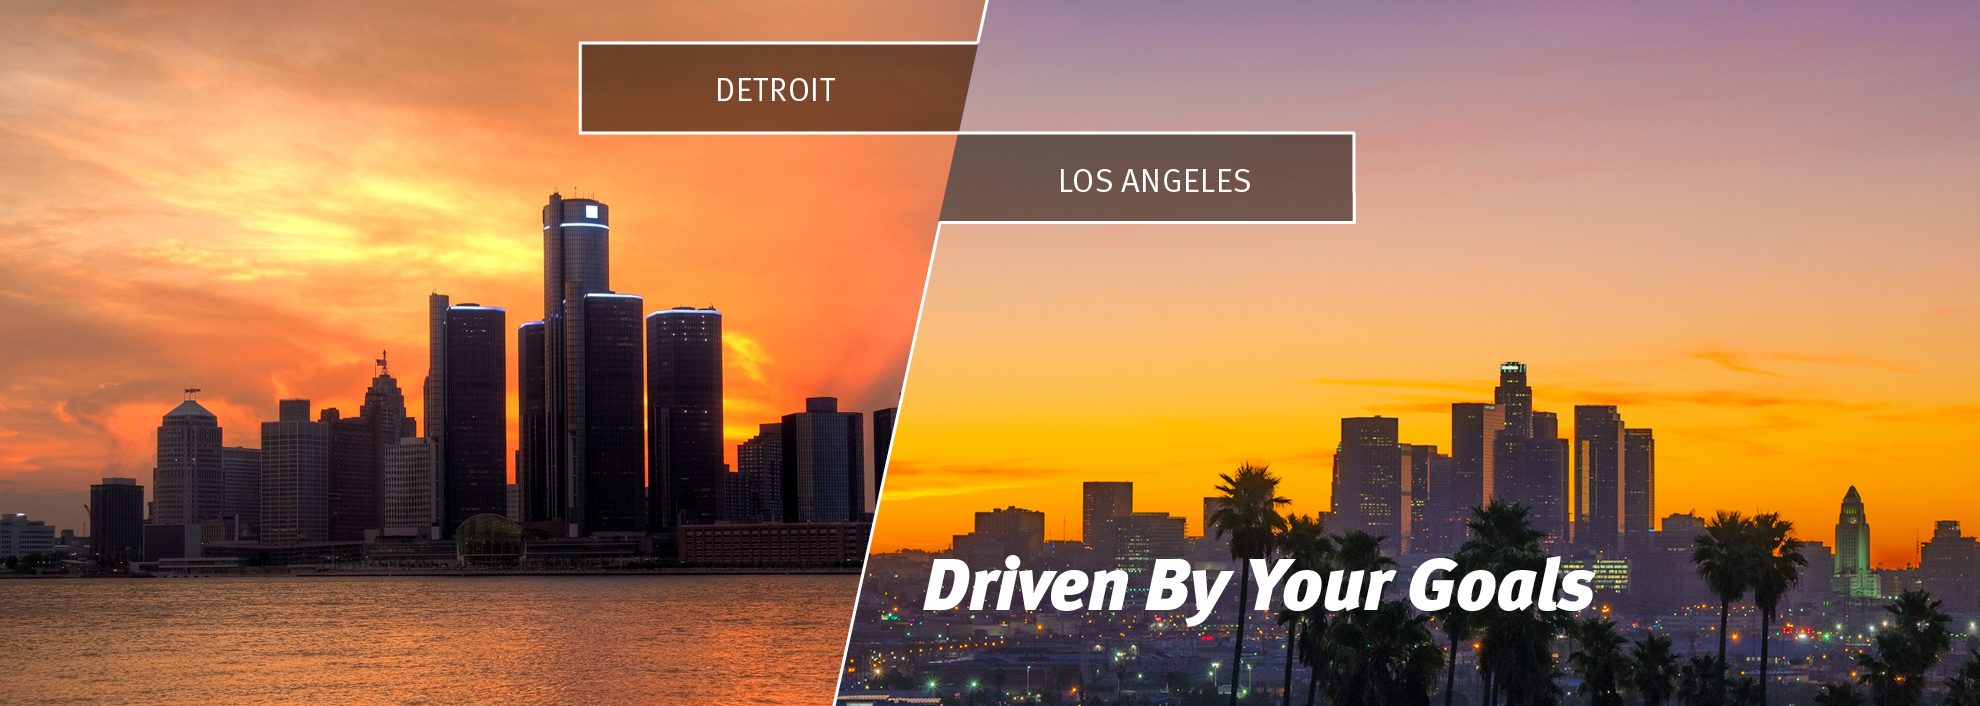 Skylines of Detroit and Los Angeles